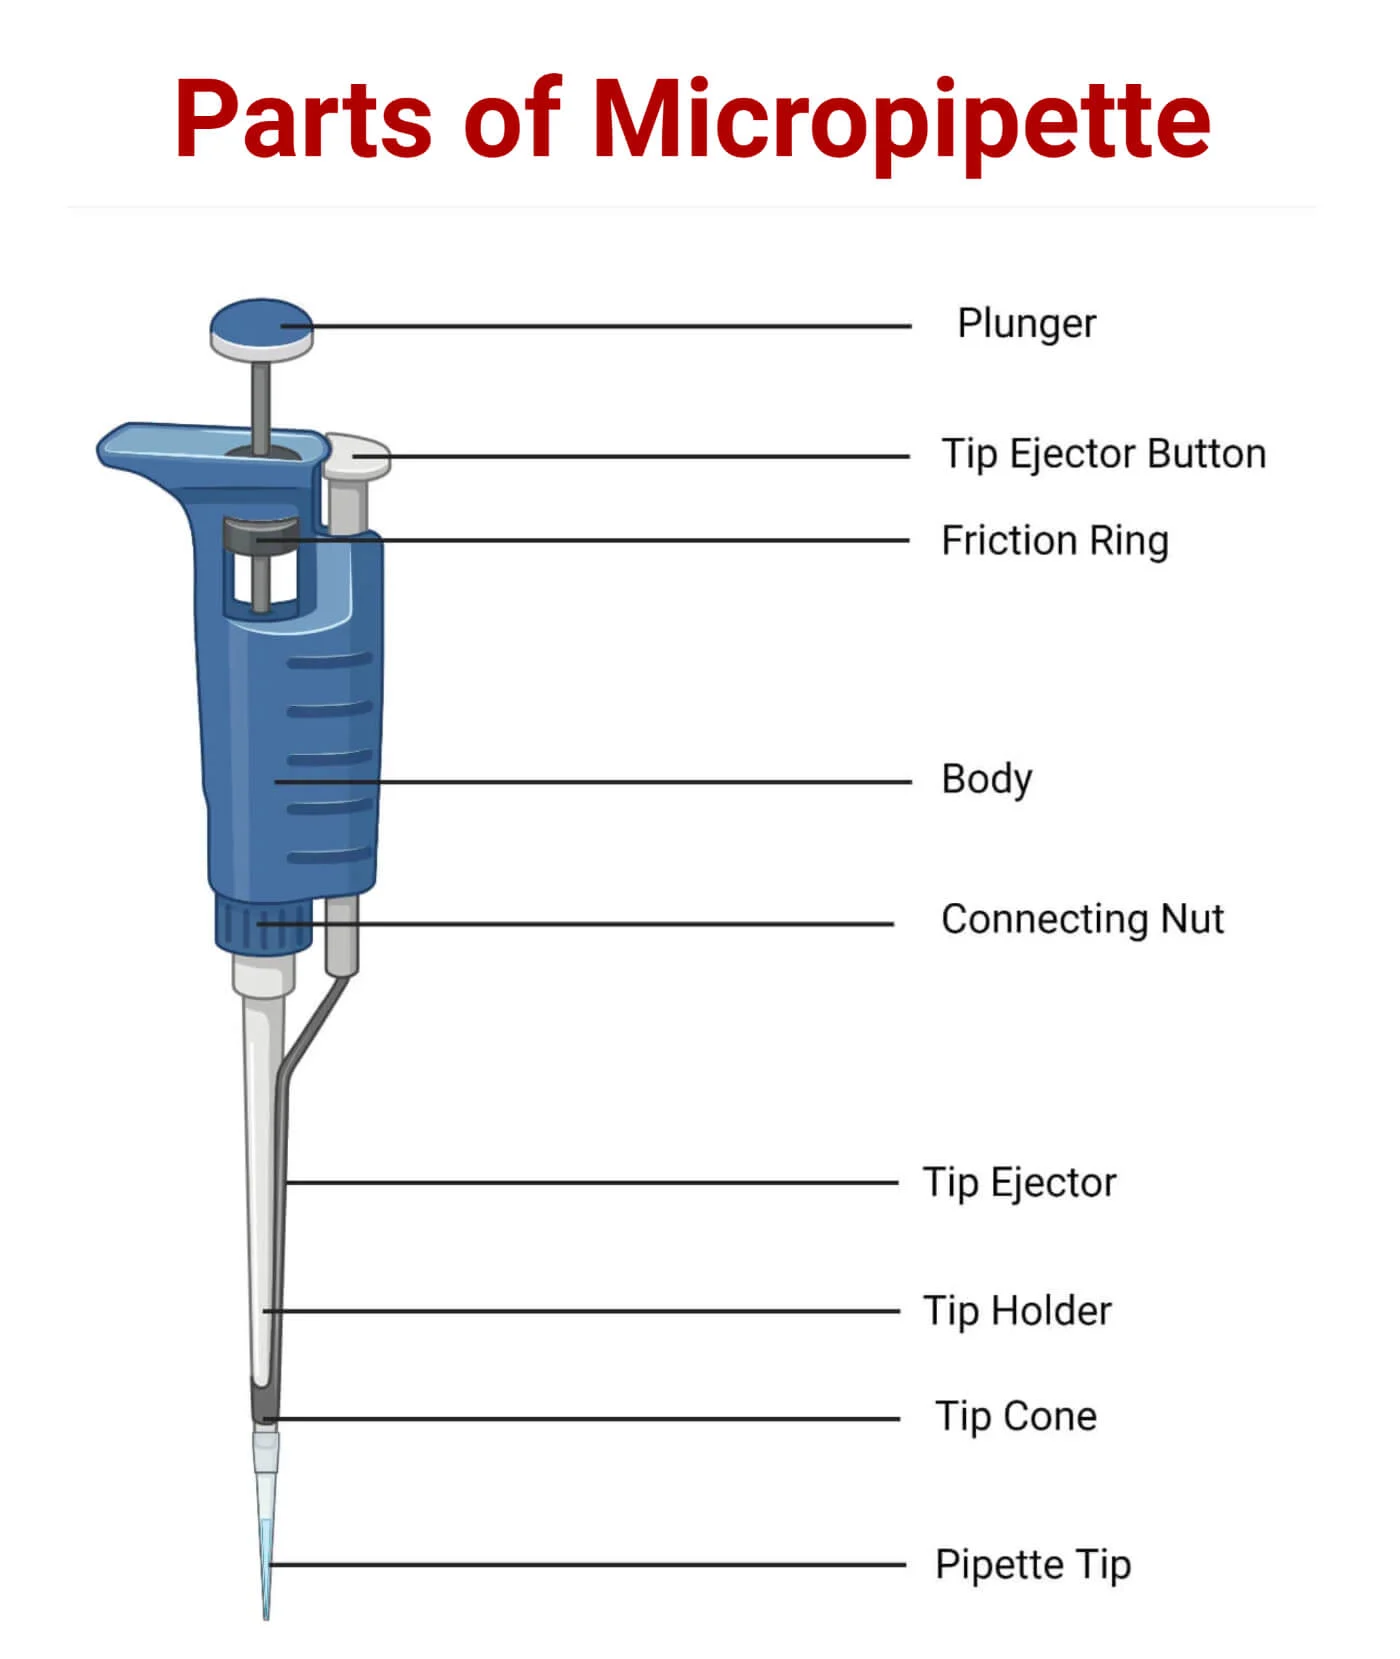 Illustration of micropipette maintenance and calibration